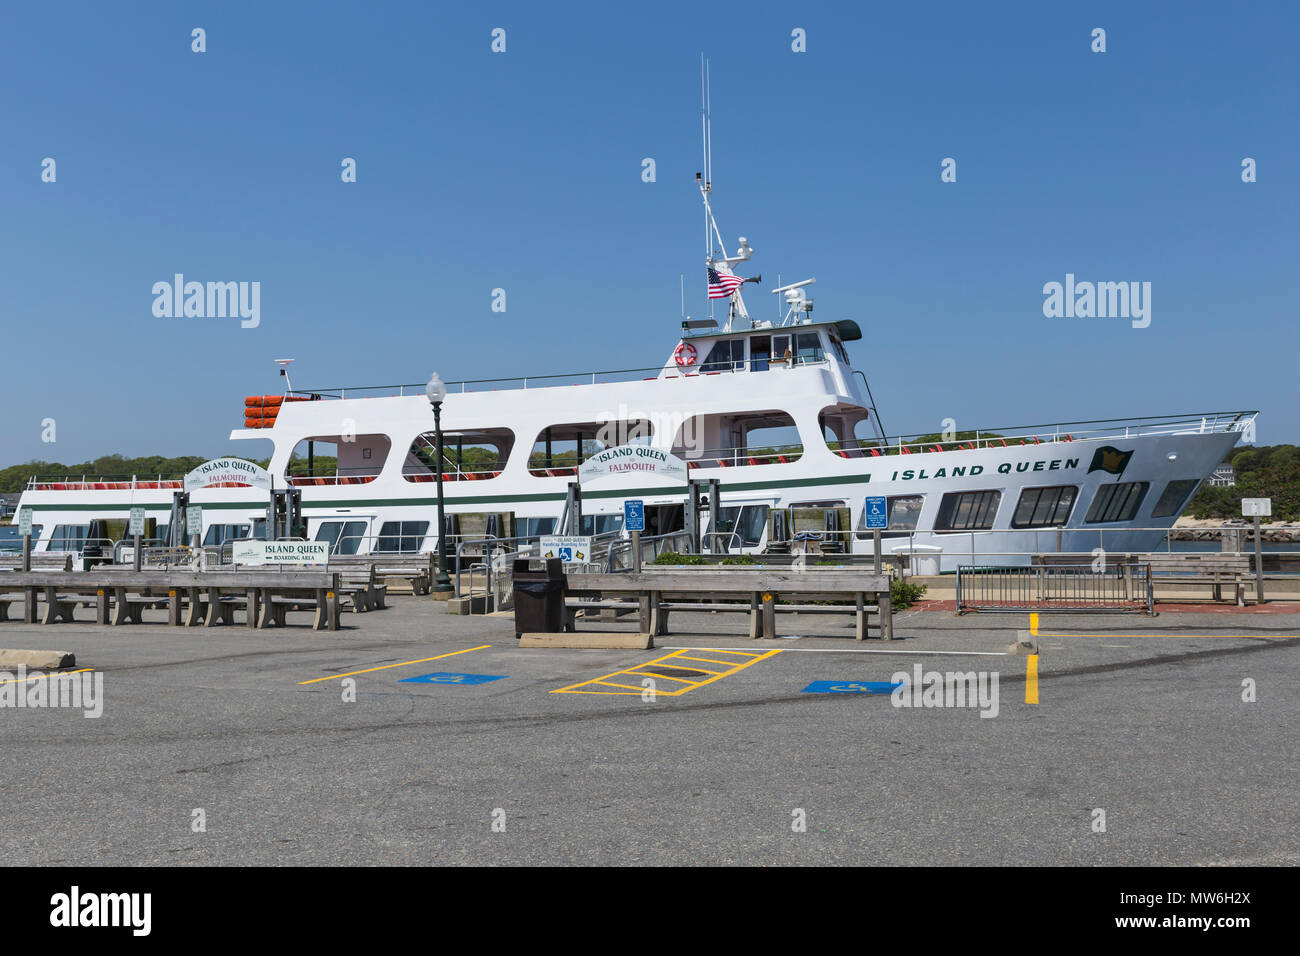 The Island Queen ferry from Martha's Vineyard to Falmouth docked in the harbor in Oak Bluffs, Massachusetts waiting for its next run. Stock Photo